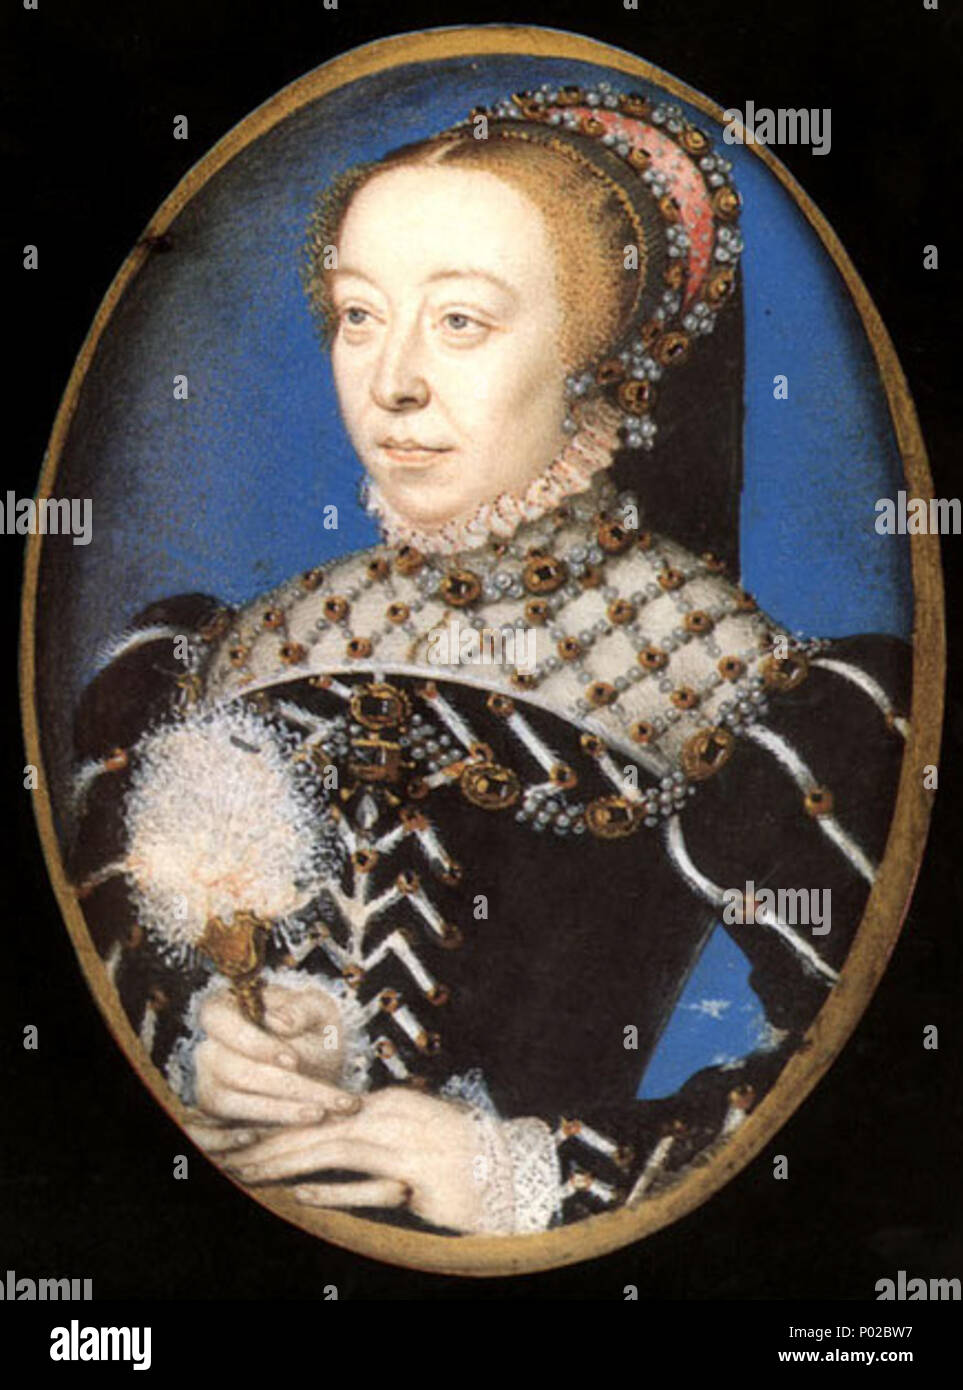 . (Dropped shadow version) Miniature of Catherine de' Medici, 'a rare portrait of Catherine before she was widowed in 1559, when she adopted the veil and severely plain dress of a widow.'  . Portrait of Catherine de' Medici (1519-1589) . circa 1555 16 Catherinedemedicishadow Stock Photo